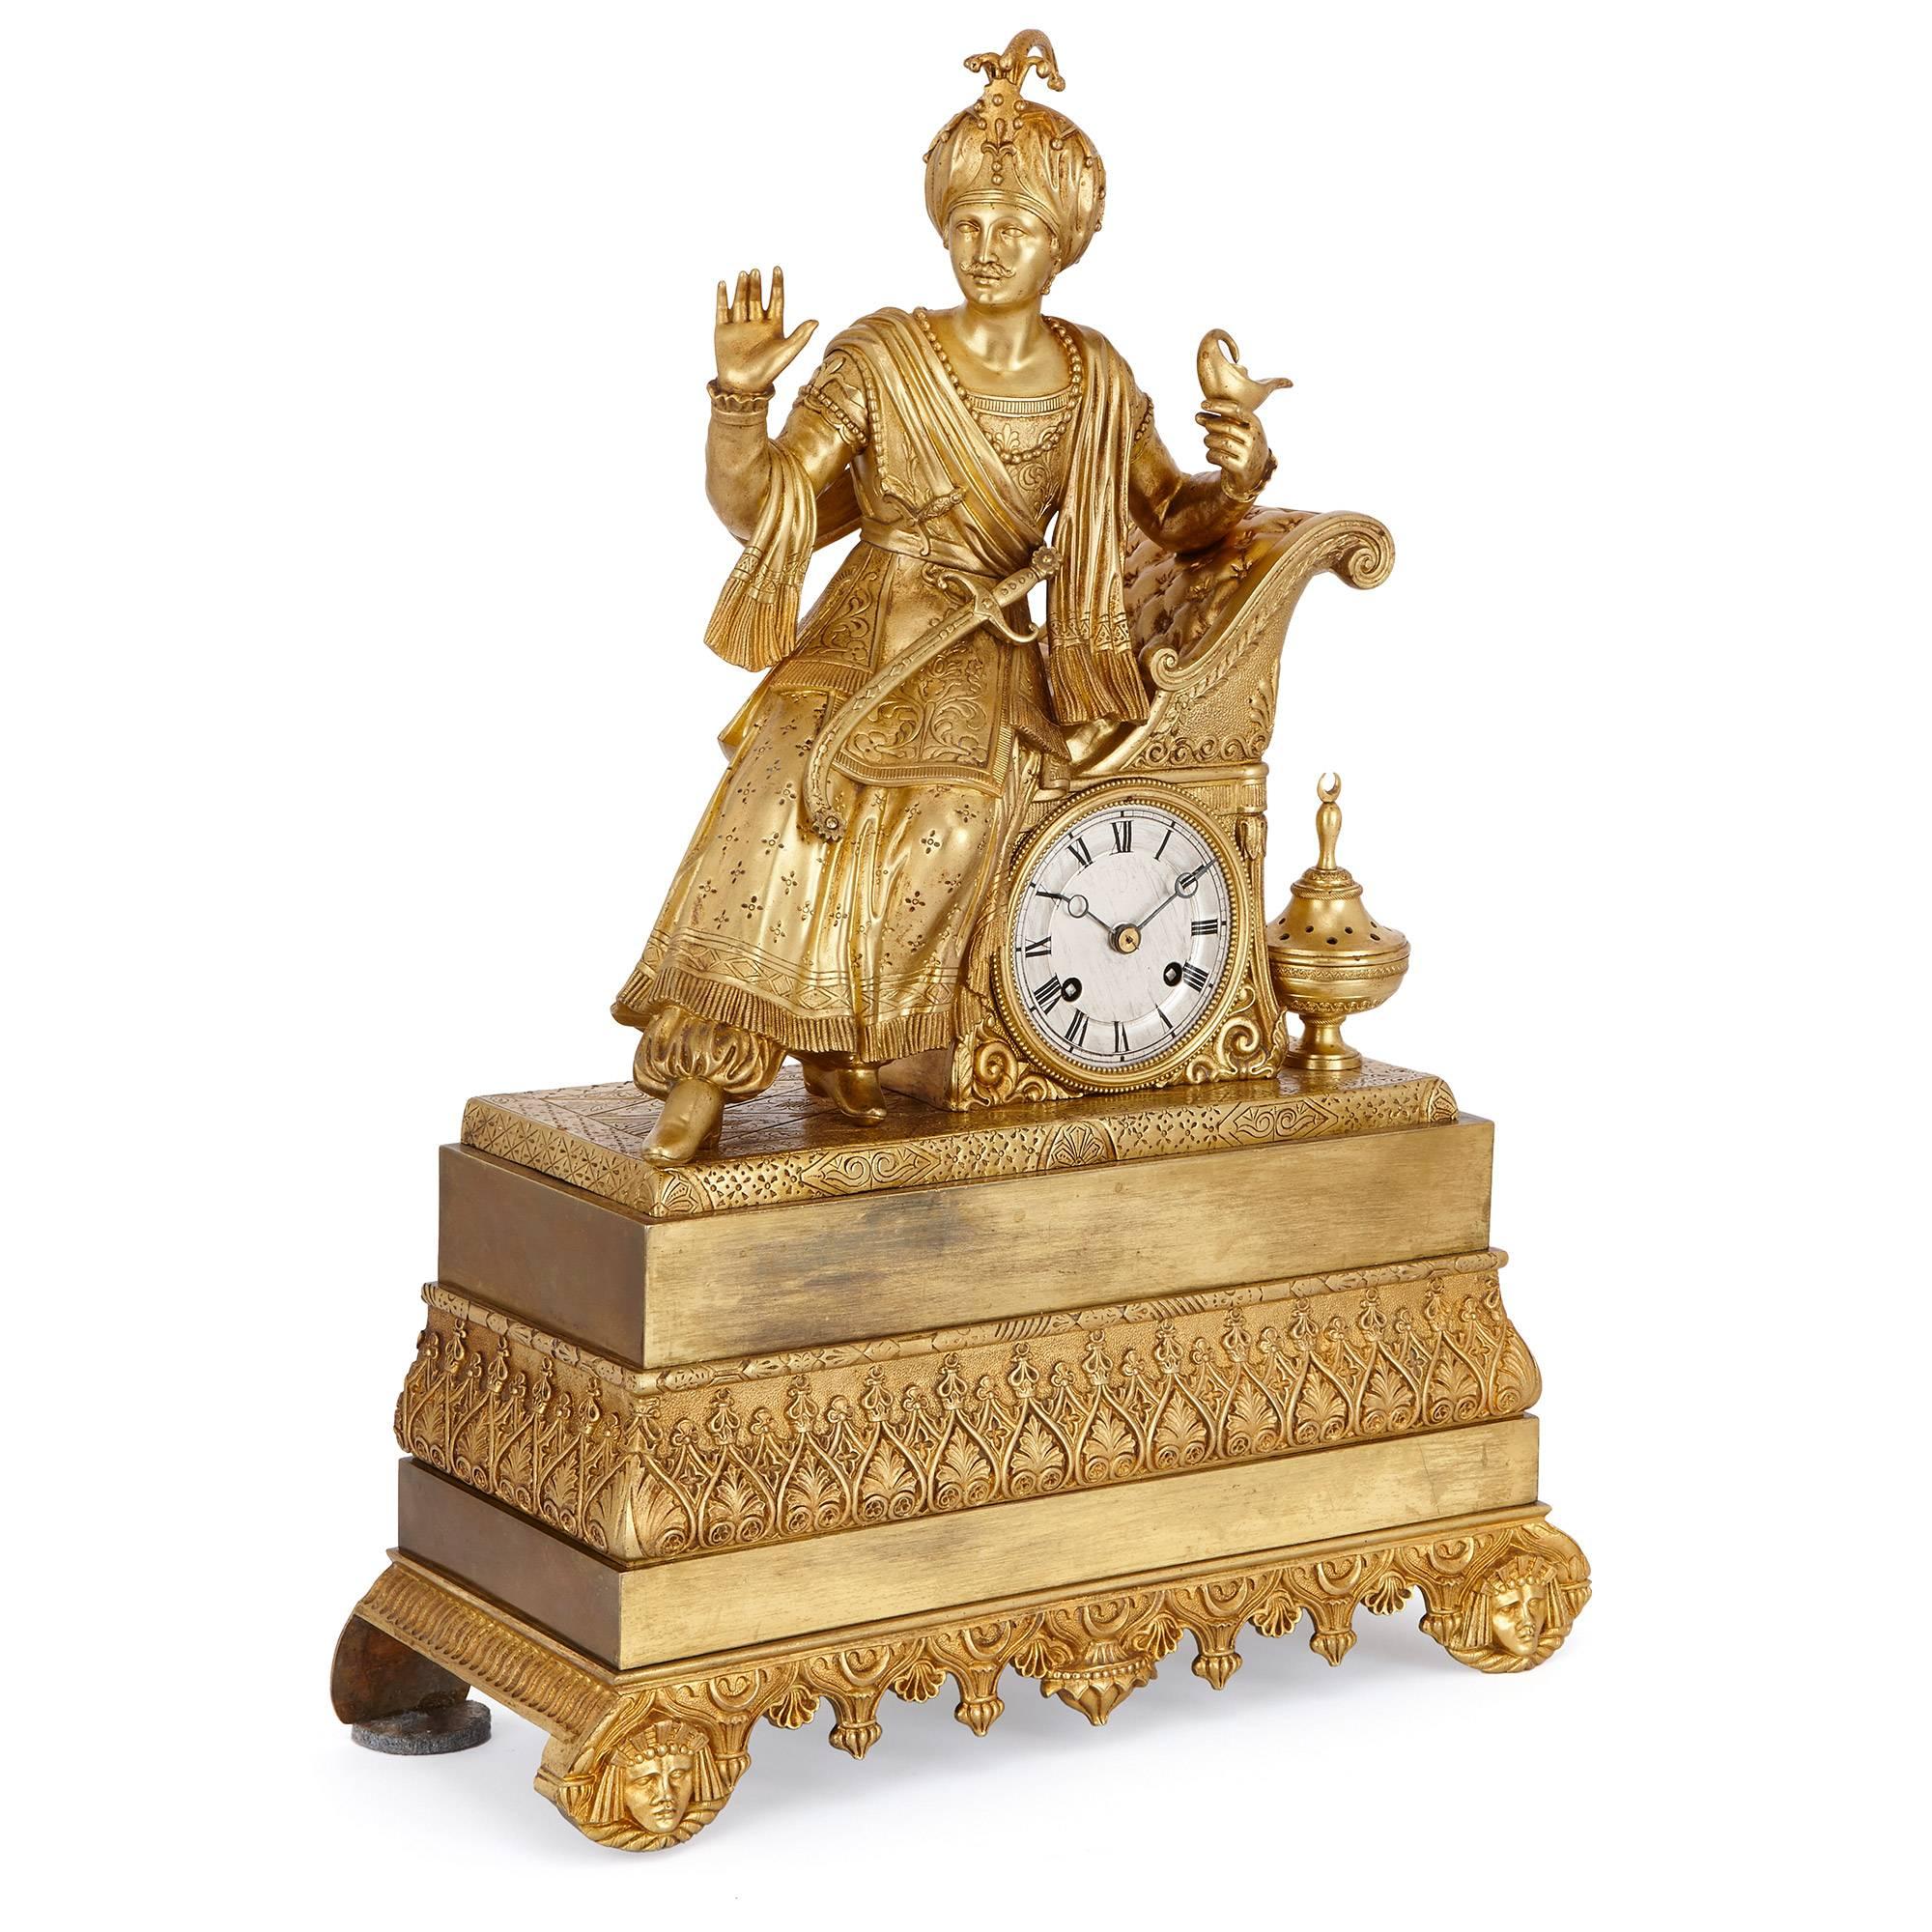 This striking and highly detailed mantel clock is made entirely of ormolu, and is surmounted by the figure of an Eastern nobleman. He wears typical dress of his location and period: finely detailed robes, a curved sword and a turban. He holds a lamp